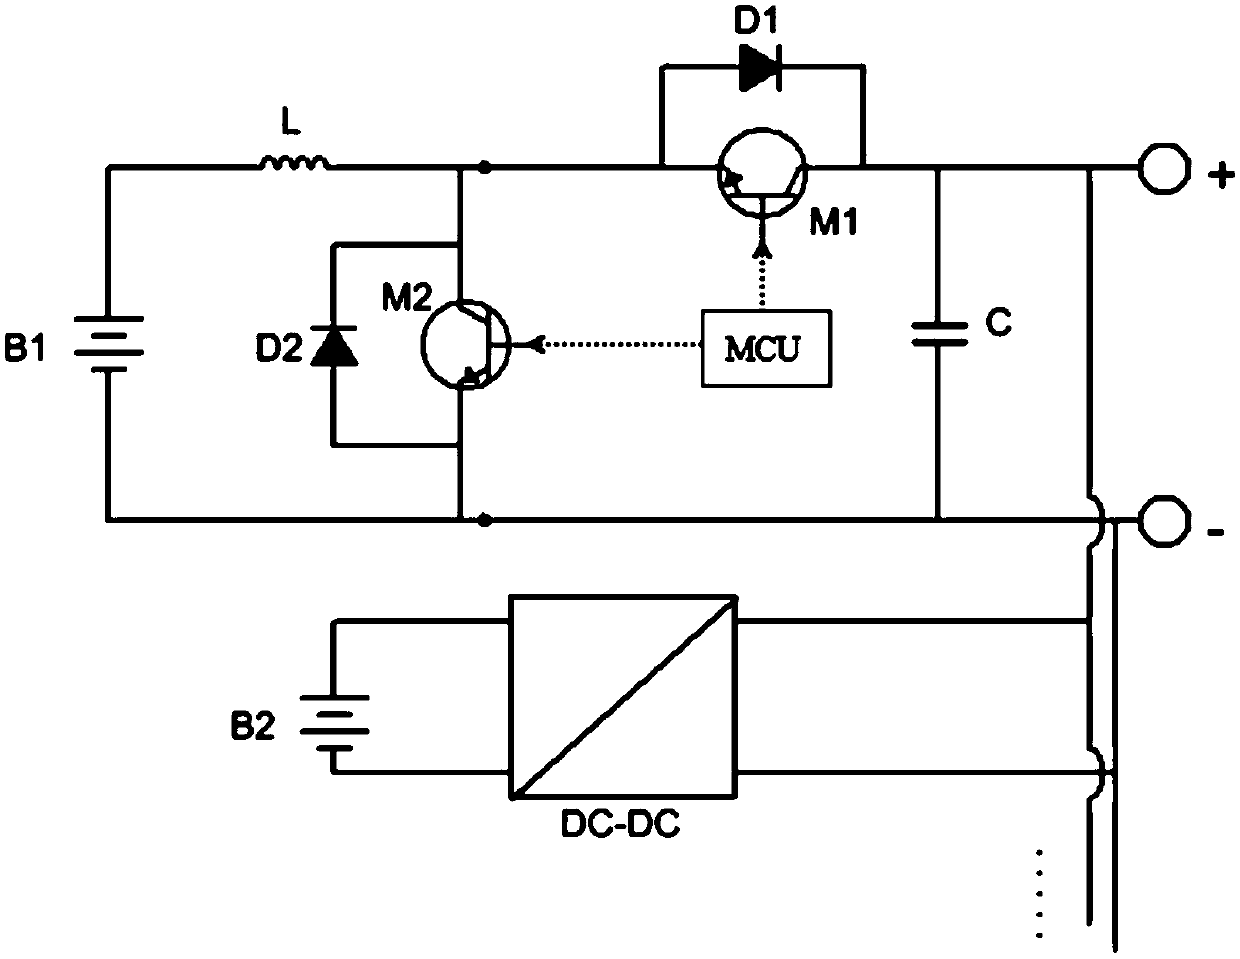 Composite power supply system